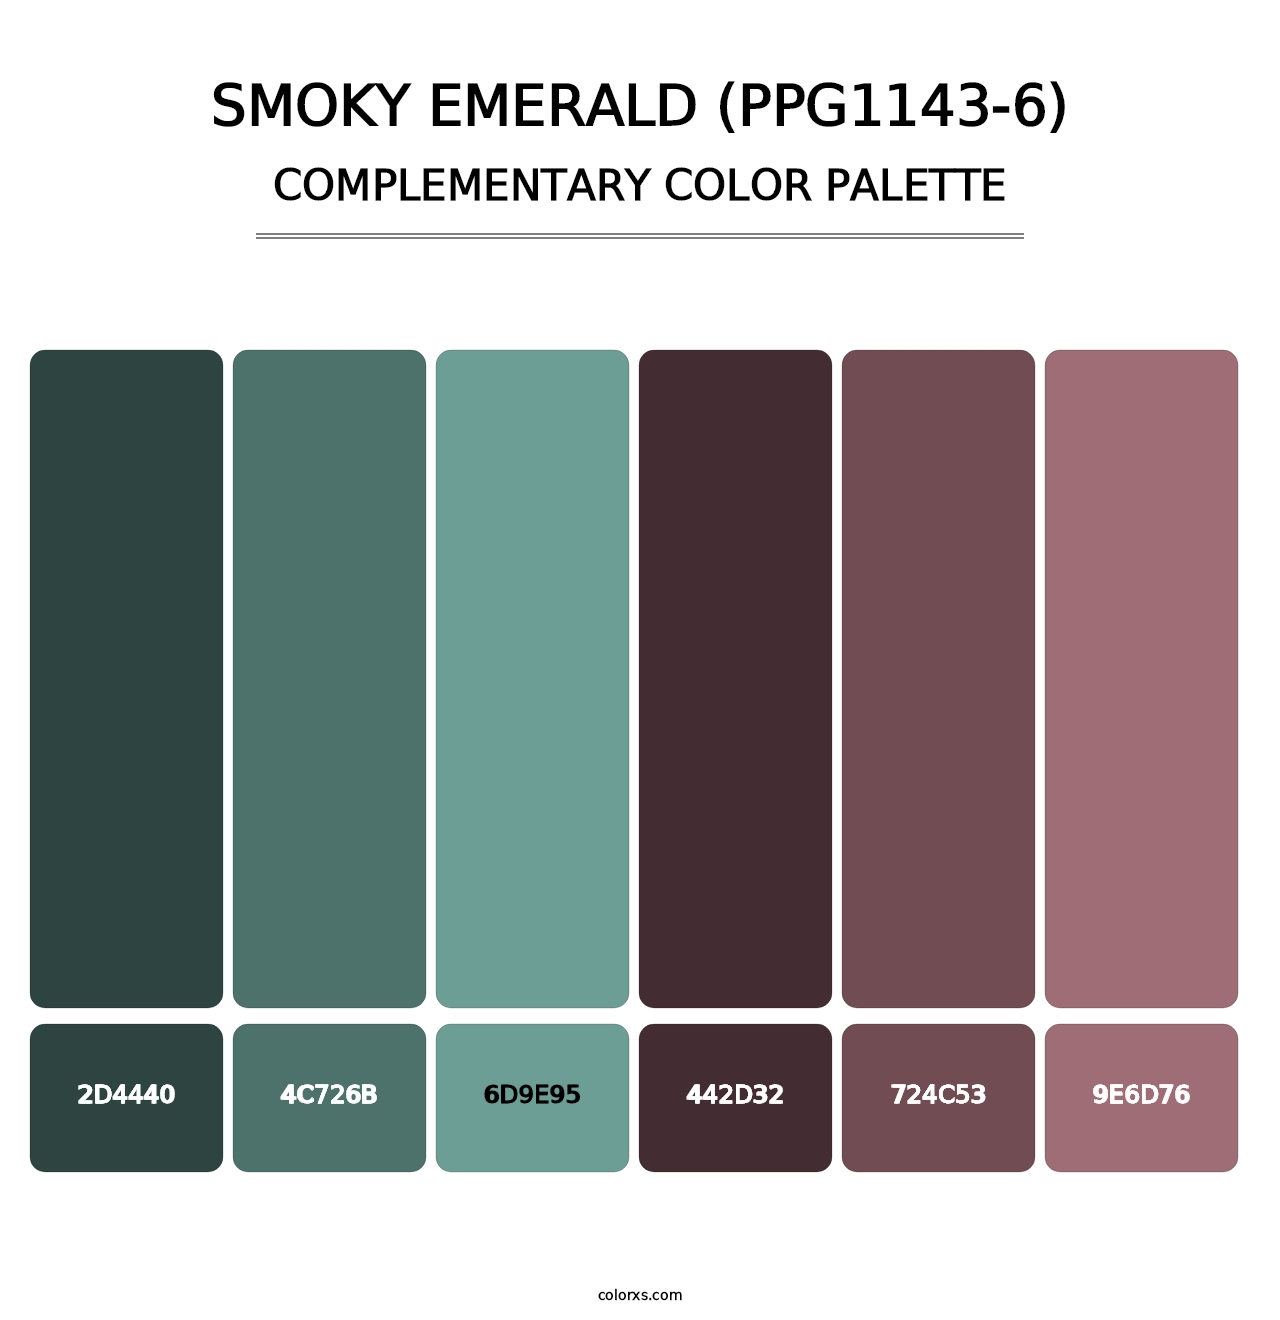 Smoky Emerald (PPG1143-6) - Complementary Color Palette